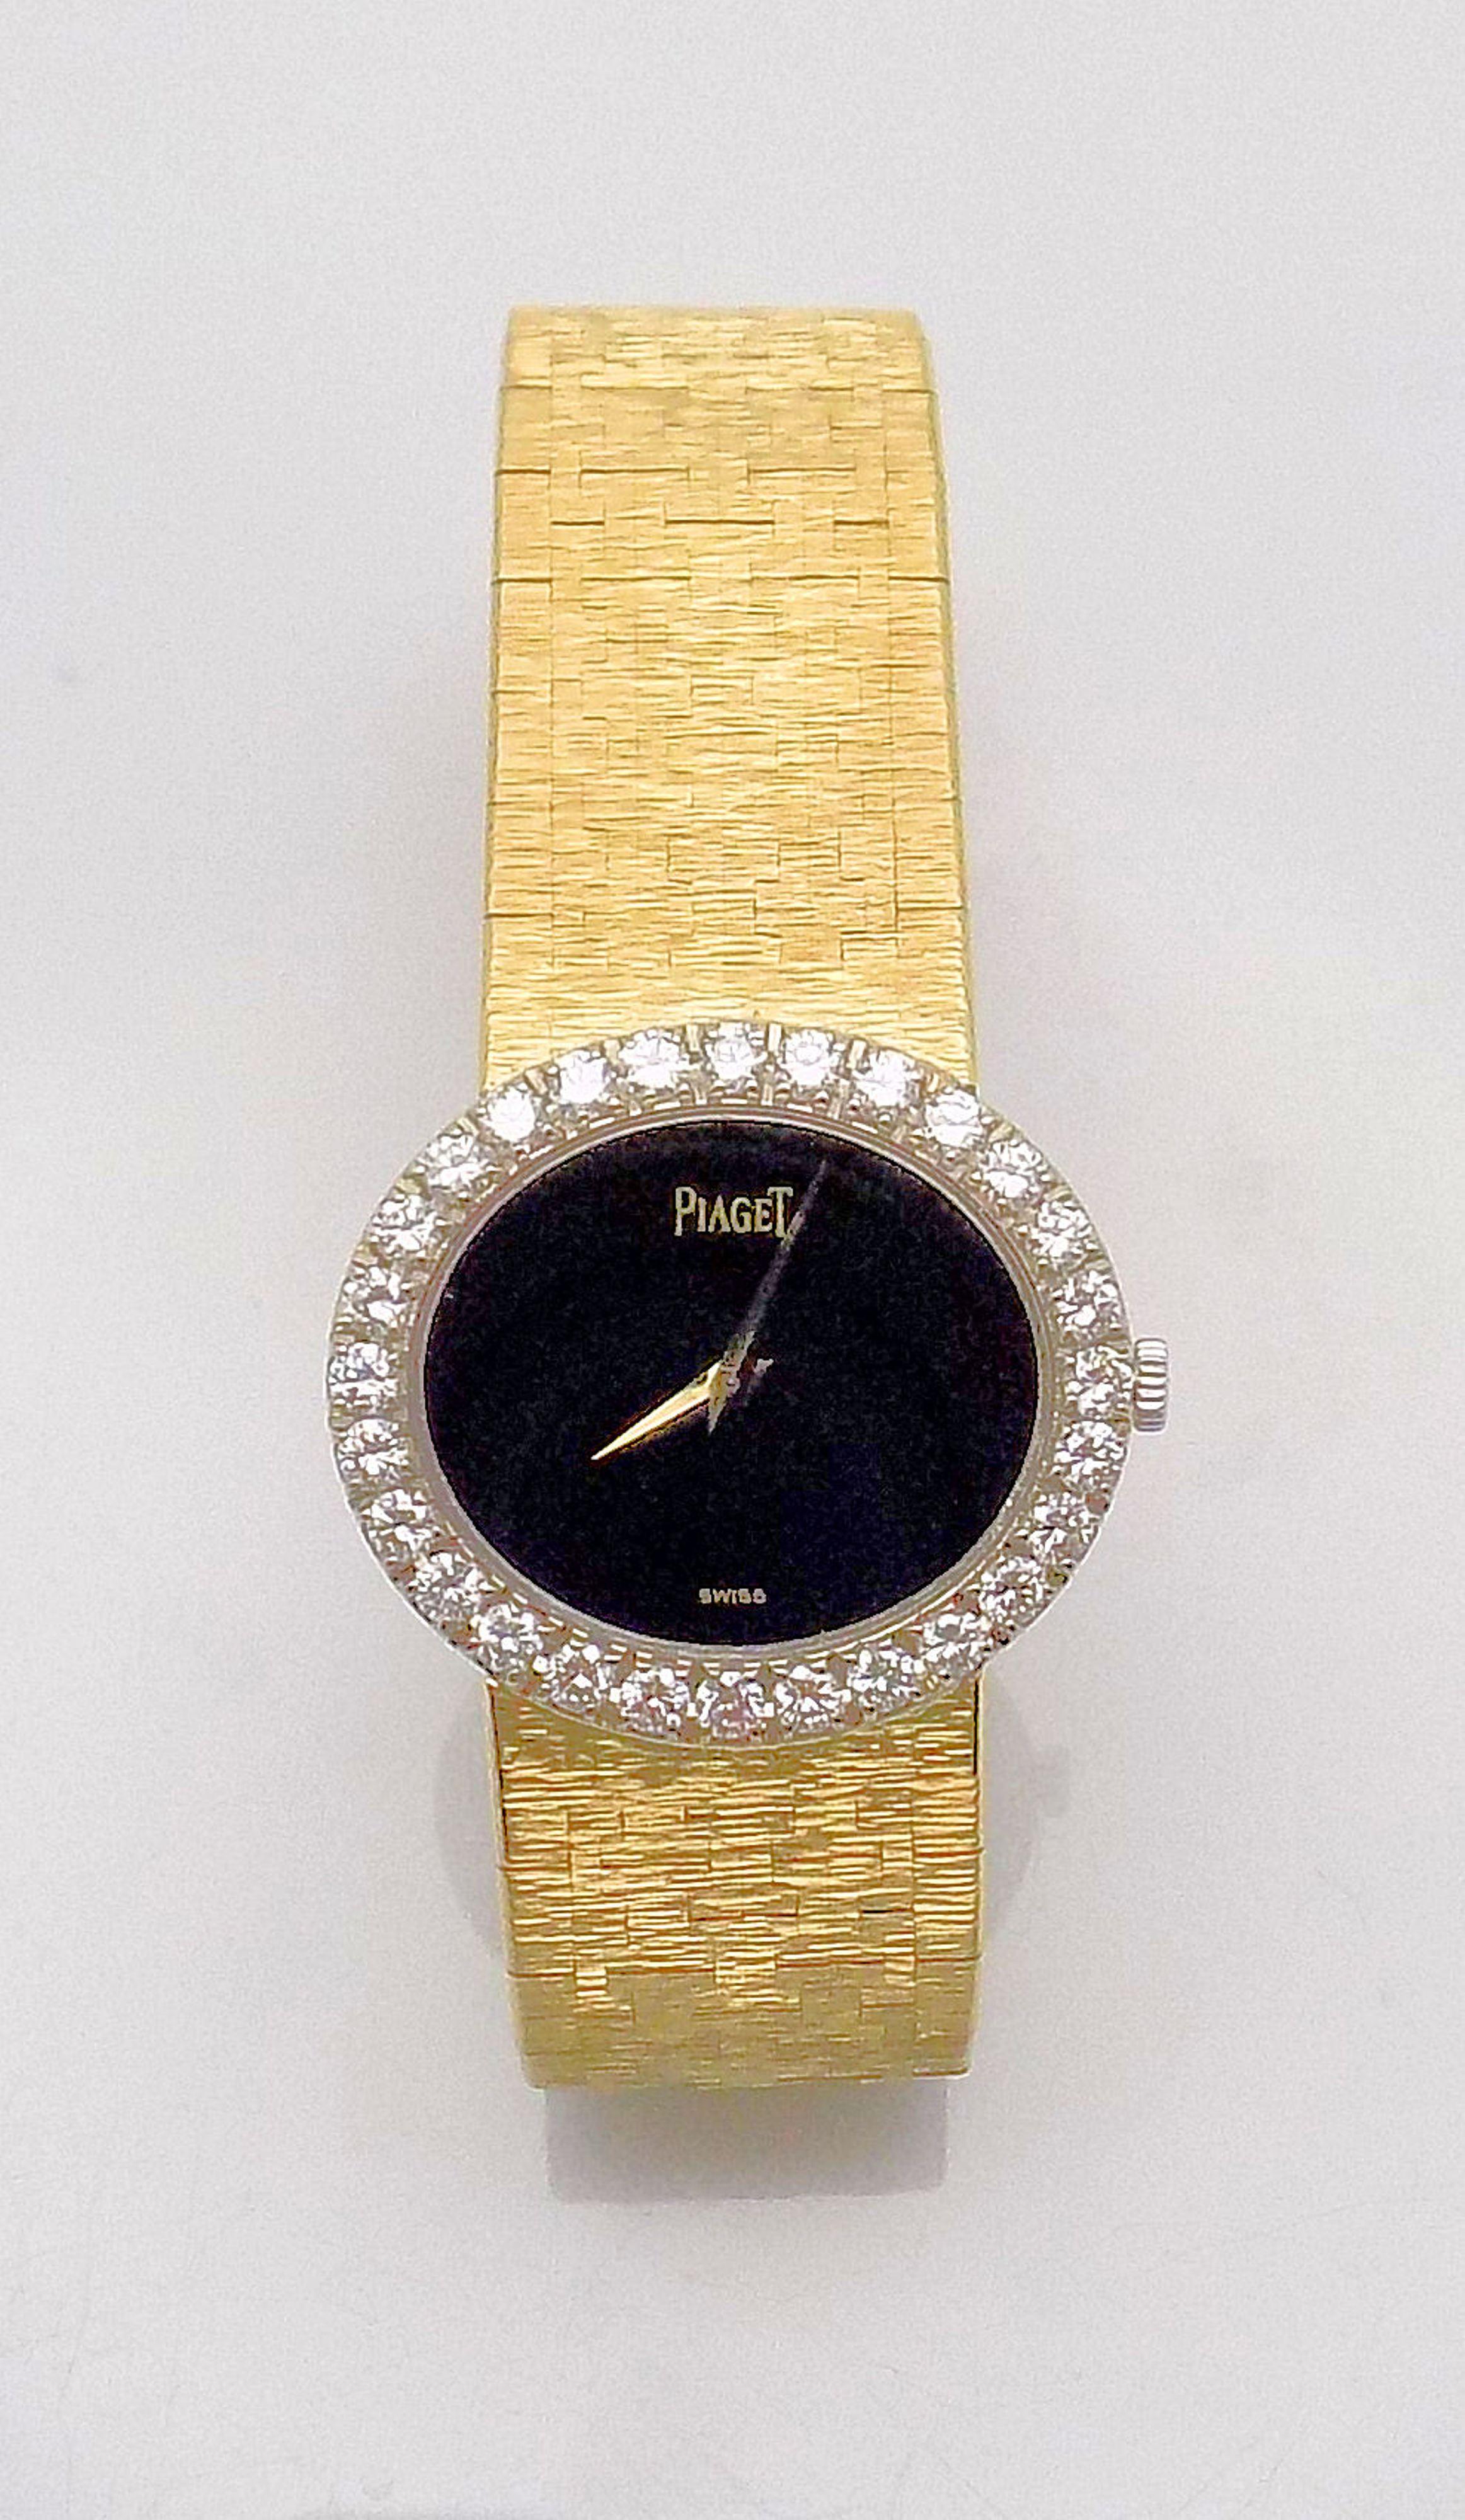 Rare 18 Karat Yellow Gold Lady's Stone Dial and Diamond Bezel Piaget Wrist Watch In Excellent Condition For Sale In Dallas, TX